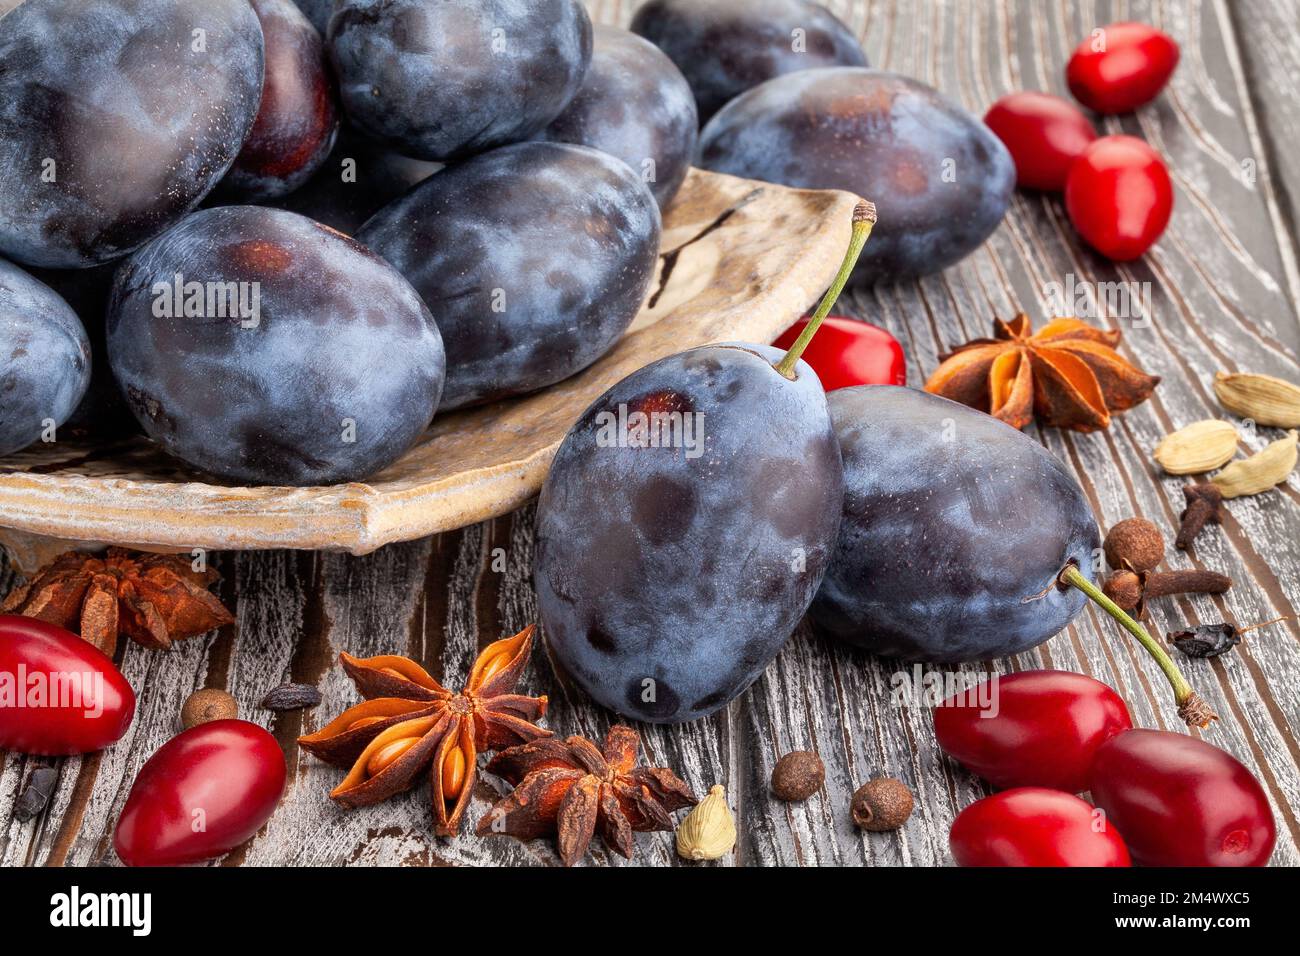 prune plums on wood background Stock Photo